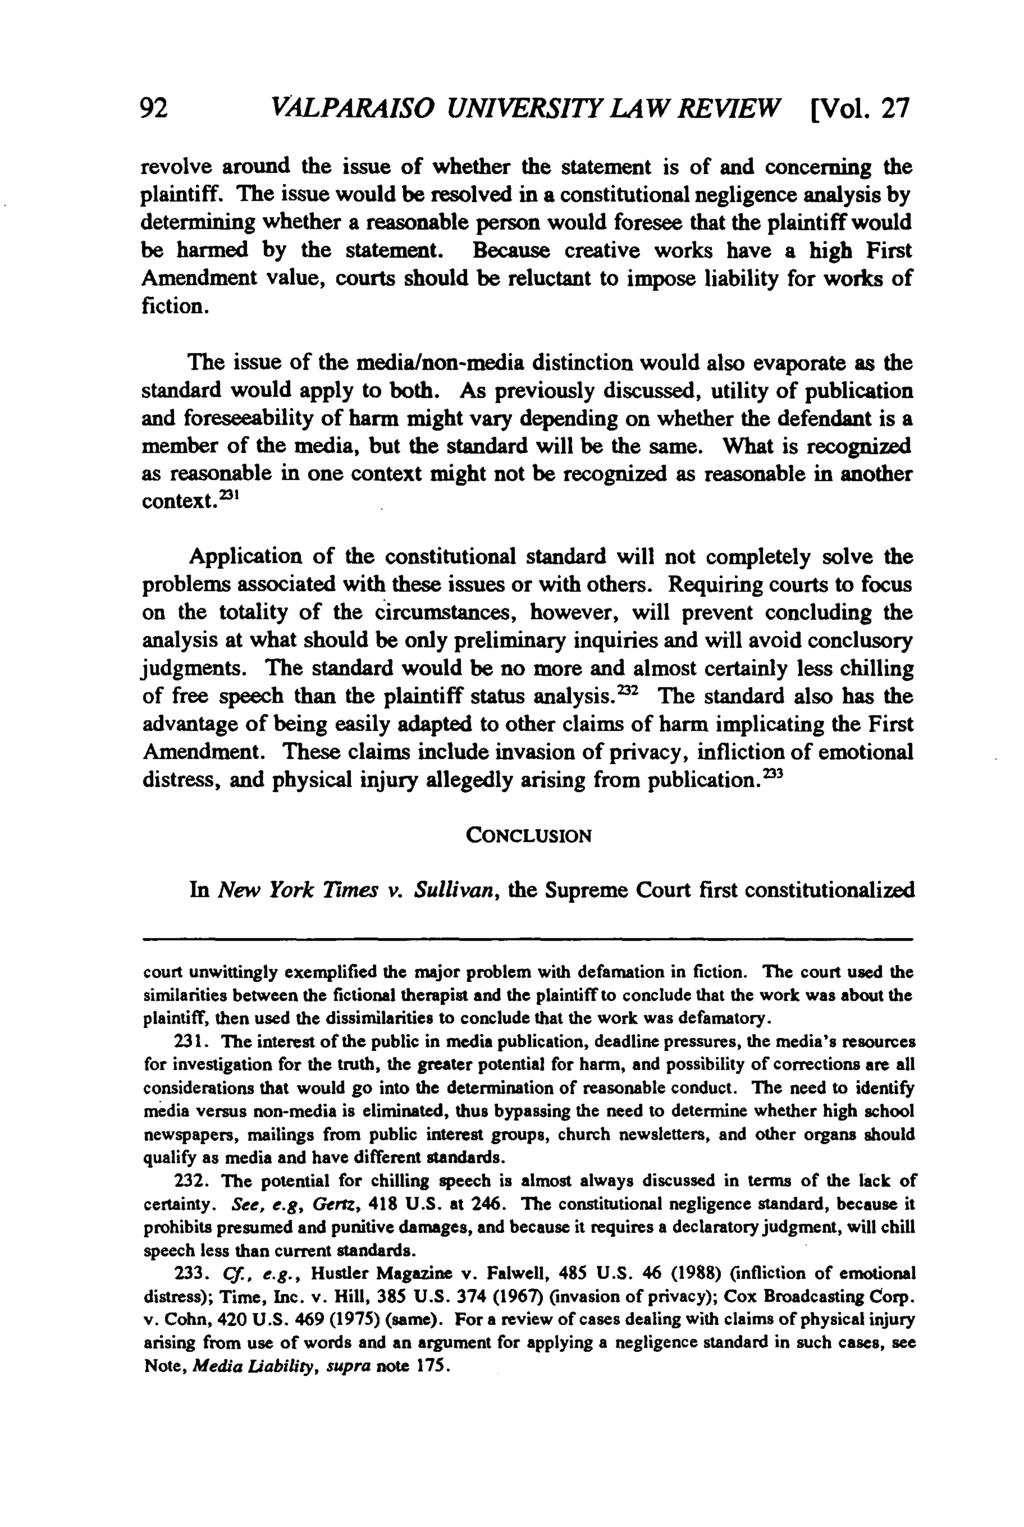 Valparaiso University Law Review, Vol. 27, No. 1 [1992], Art. 2 92 VALPARAISO UNIVERSITY LAW REVIEW [Vol. 27 revolve around the issue of whether the statement is of and concerning the plaintiff.